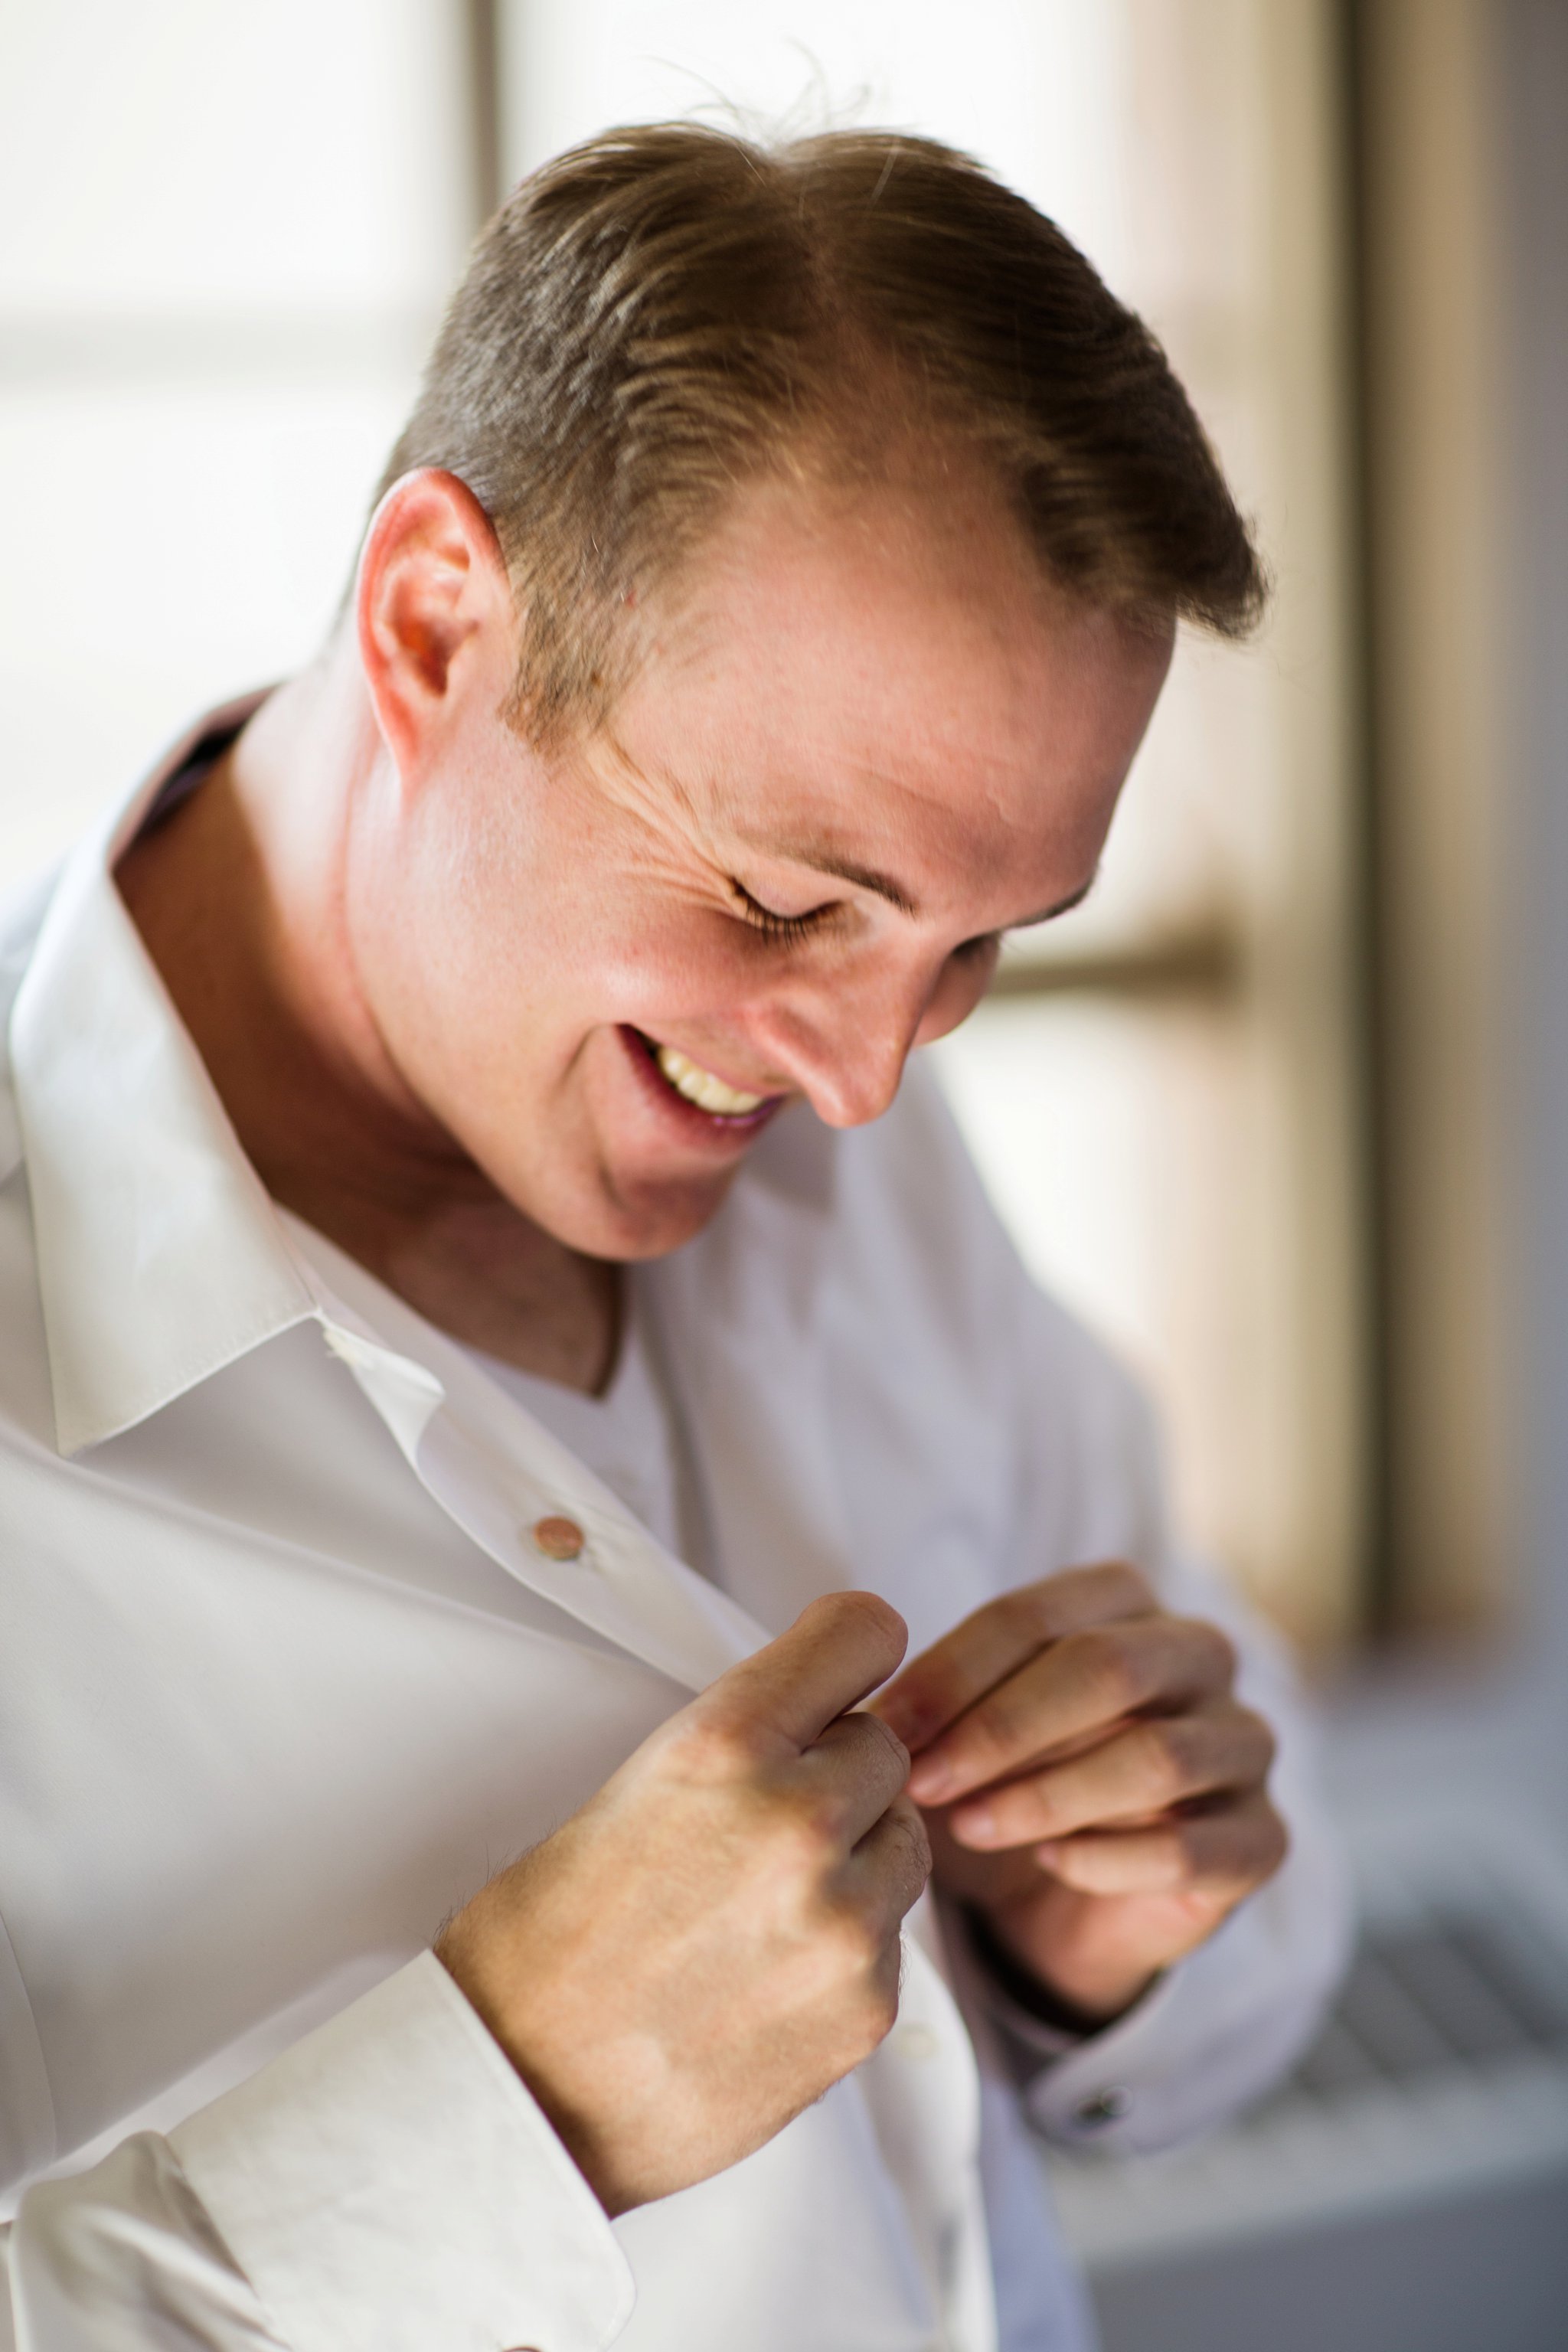 wedding | wedding photos | wedding photography | images by feliciathephotographer.com | Country Club Plaza | Kansas City | Unity Temple | wedding prep | getting ready | men's room | cuff links | smiling groom | candid | groom solo shot 